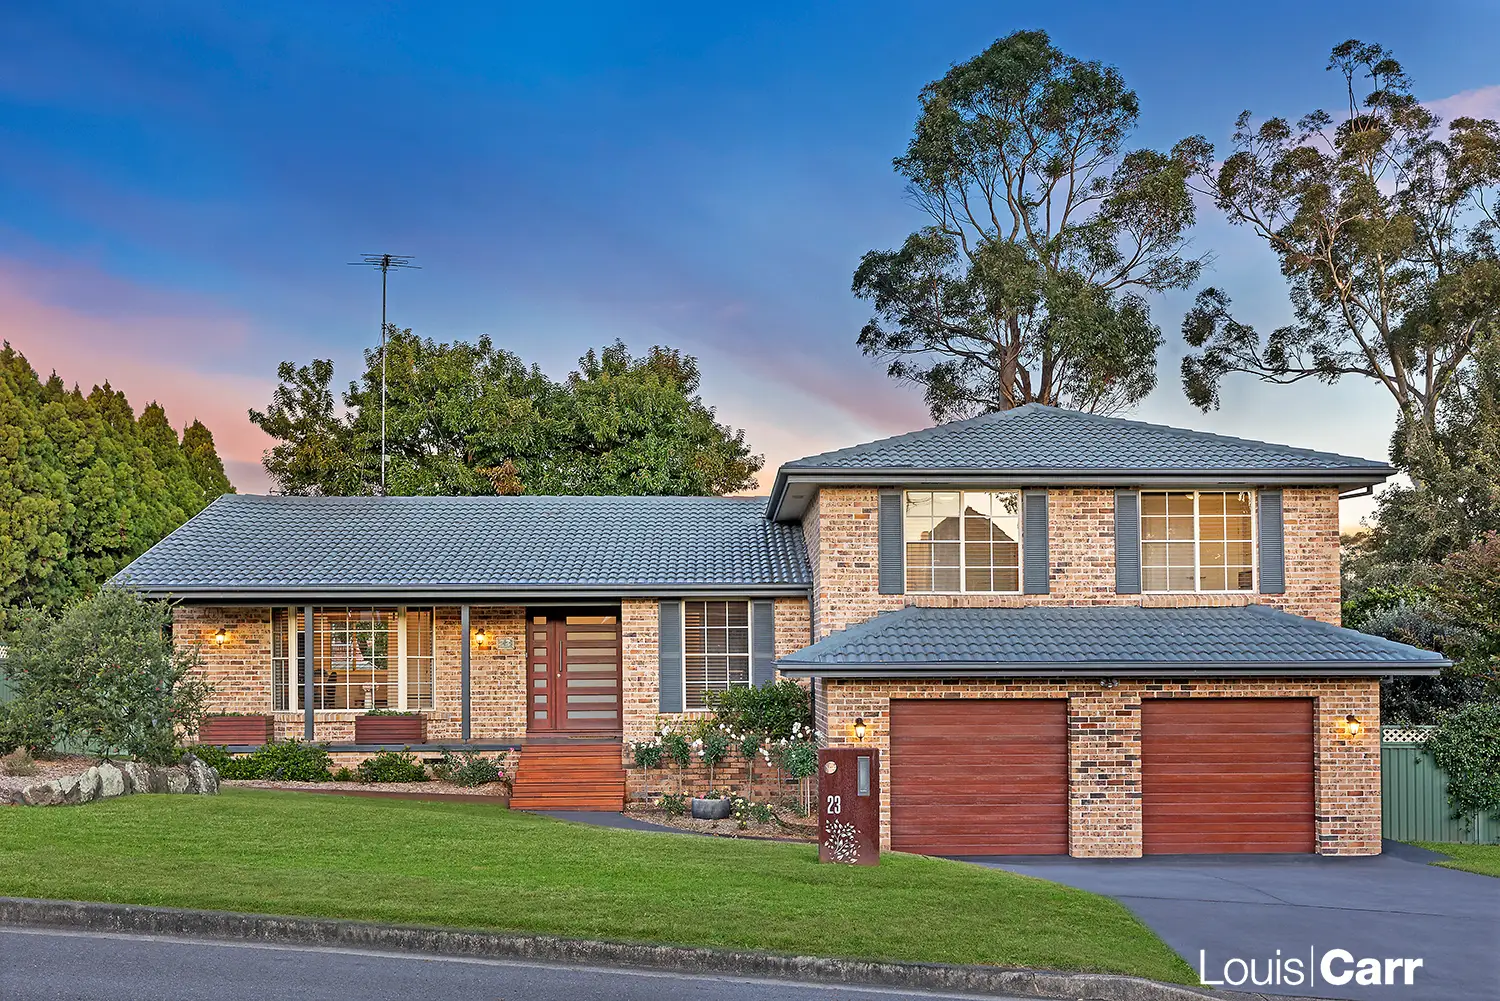 Photo #1: 23 Yaringa Road, Castle Hill - Sold by Louis Carr Real Estate